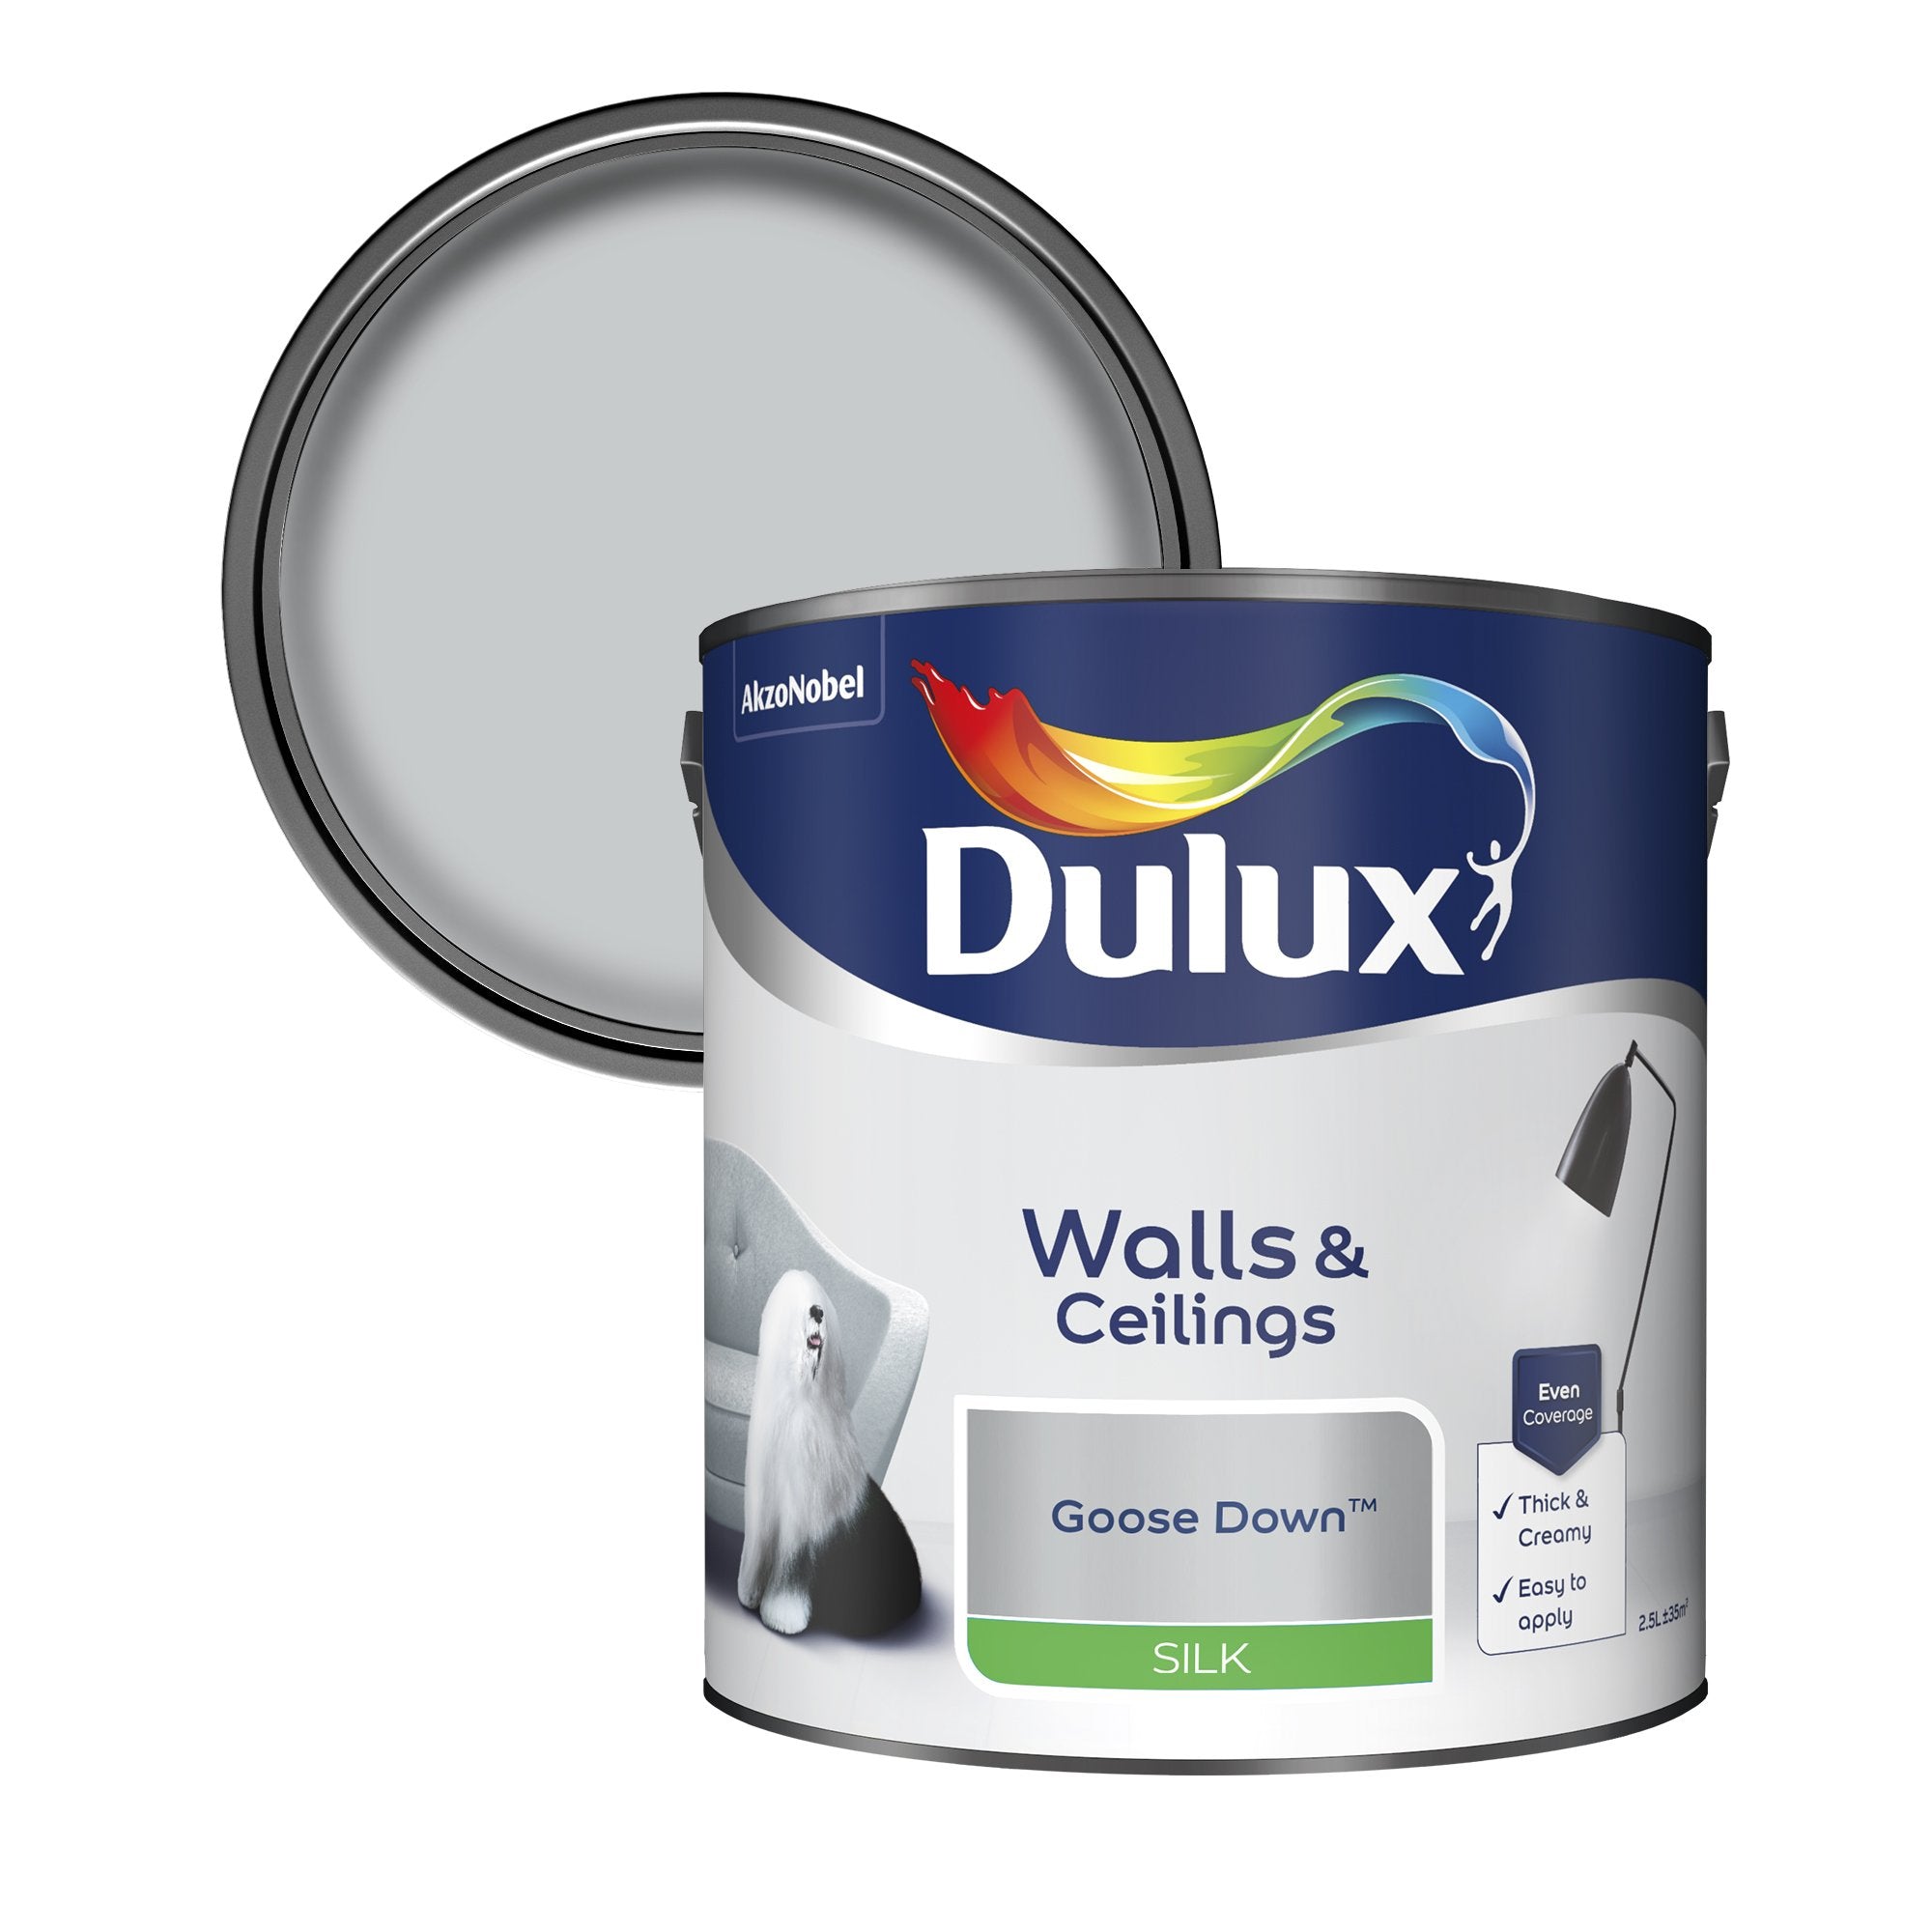 Dulux-Silk-Emulsion-Paint-For-Walls-And-Ceilings-Goose-Down-2.5L